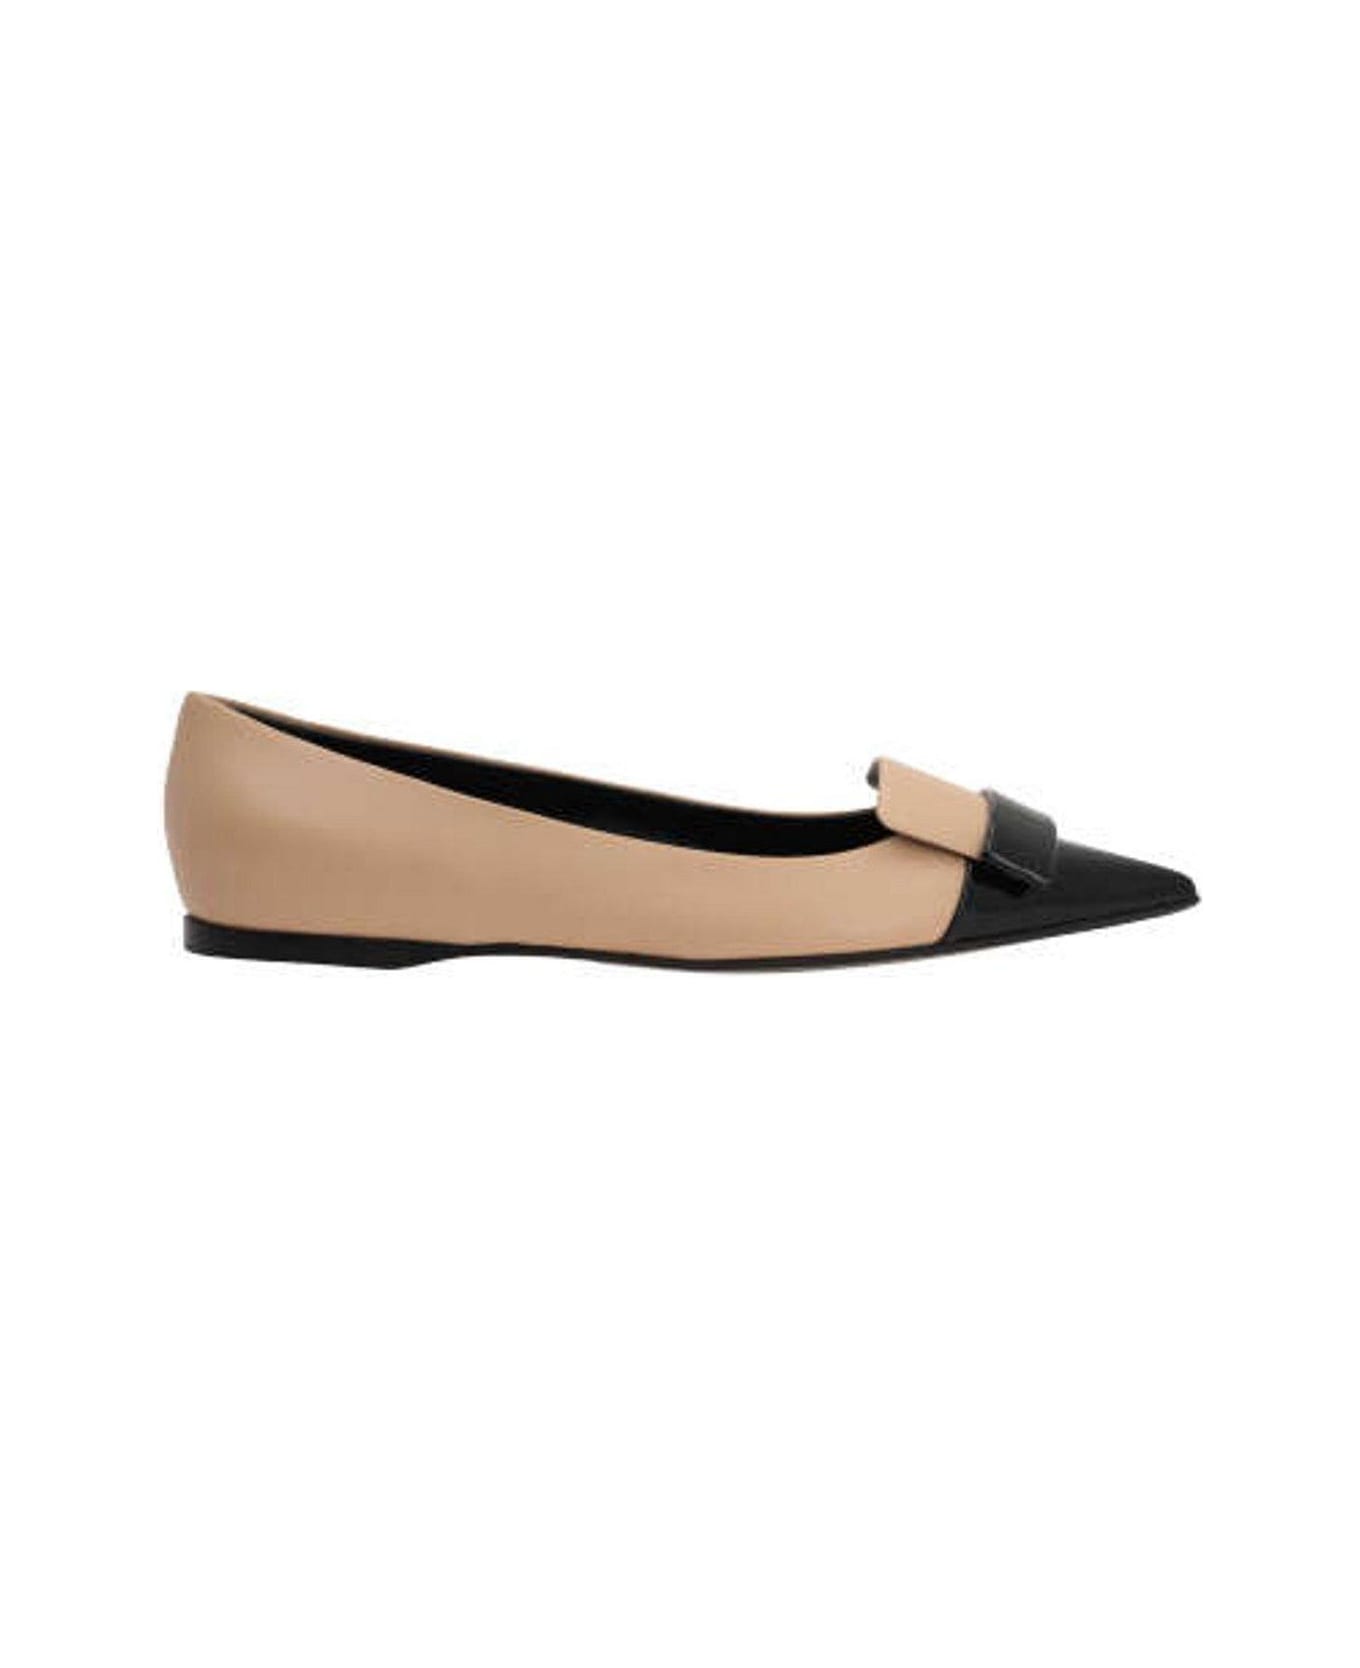 Sergio Rossi Pointed-toe Slip-on Flat Shoes - Beige